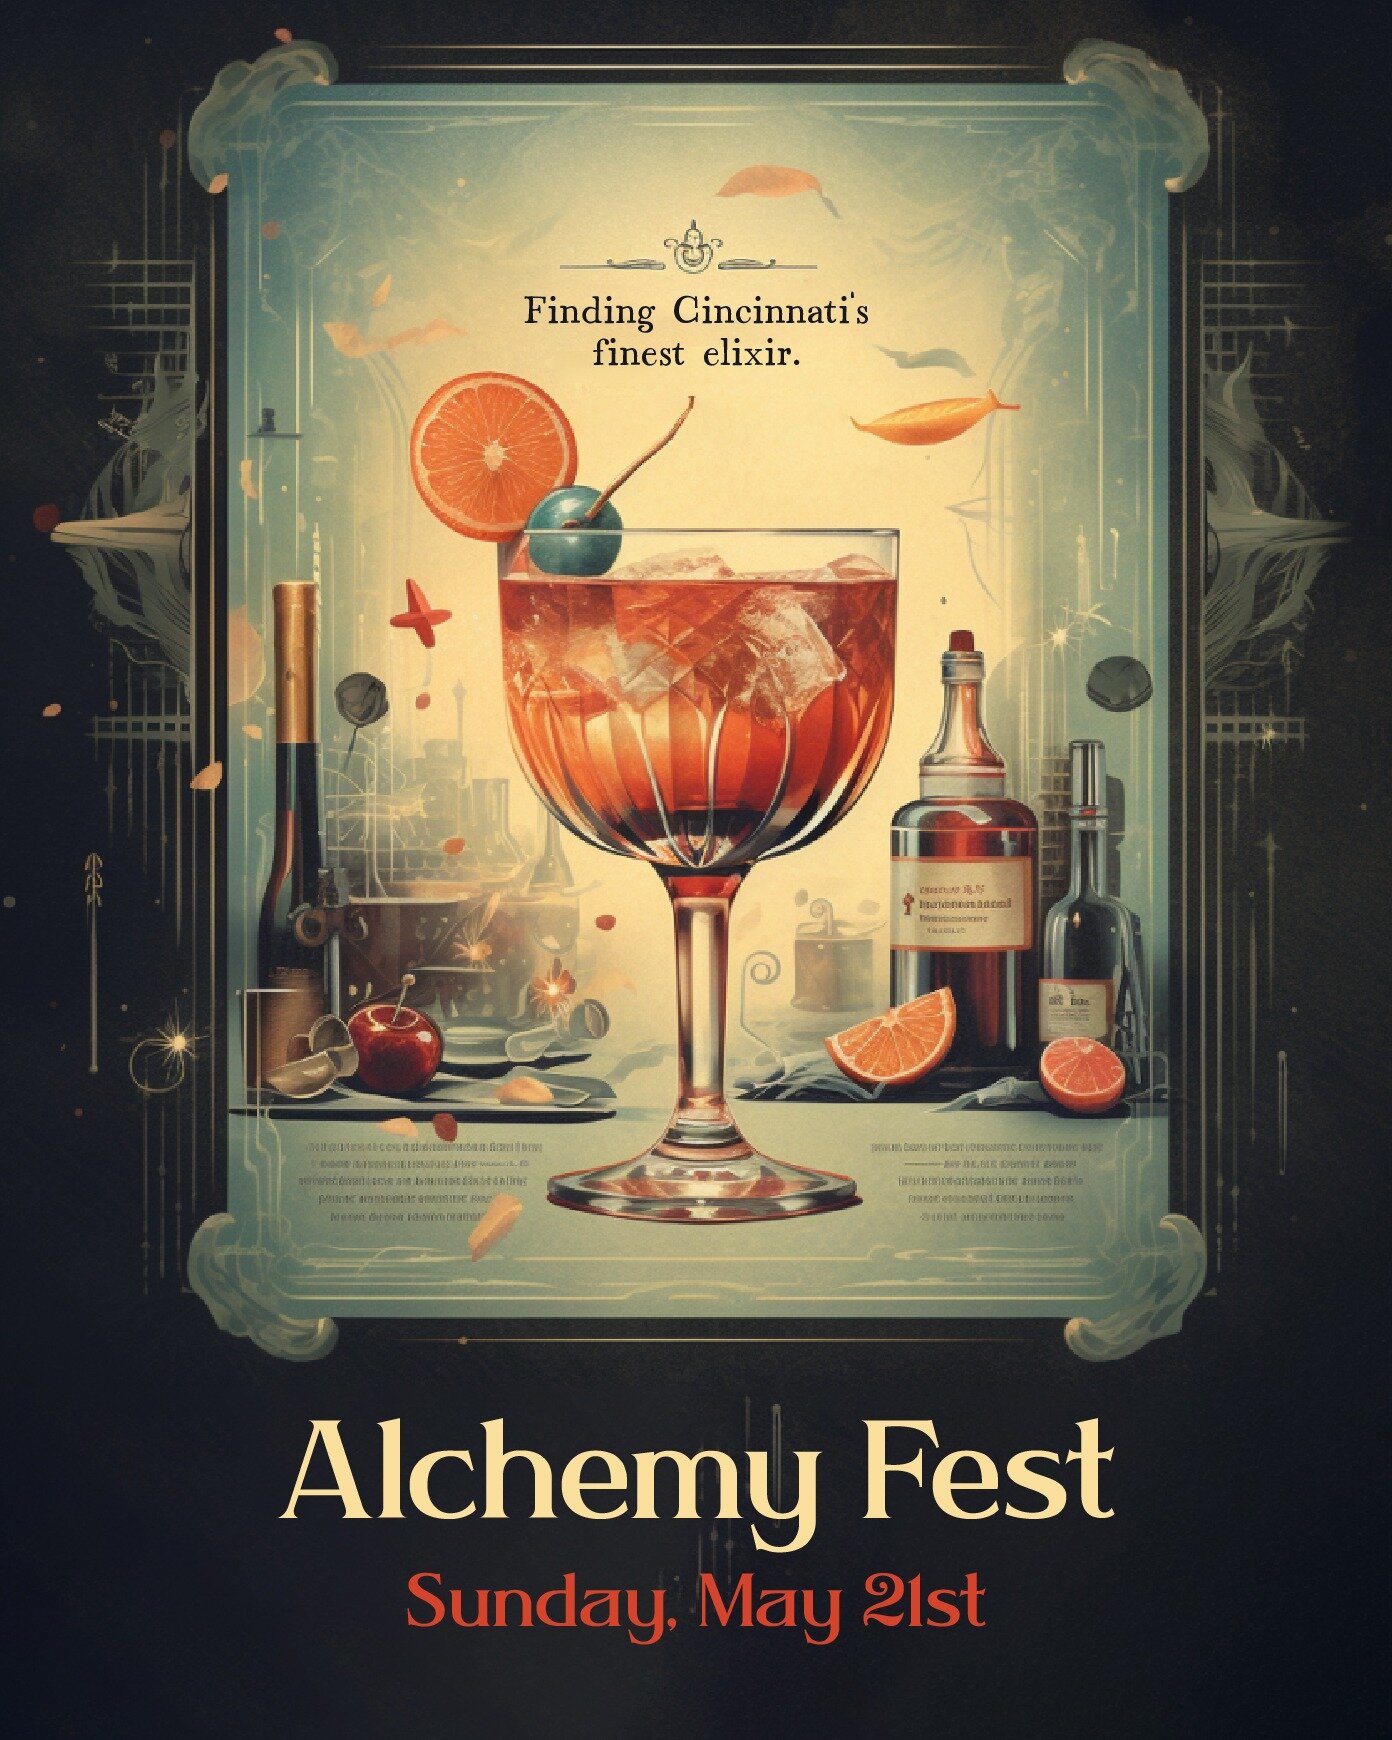 Cincinnati Alchemy Fest is just days away. On Sunday, May 21st, you get to decide which bartender crafts the region's finest elixir! 

What is Cincinnati Alchemy Fest?

It's Cincinnati's one-of-a-kind cocktail competition! This year, 15 bartenders wi